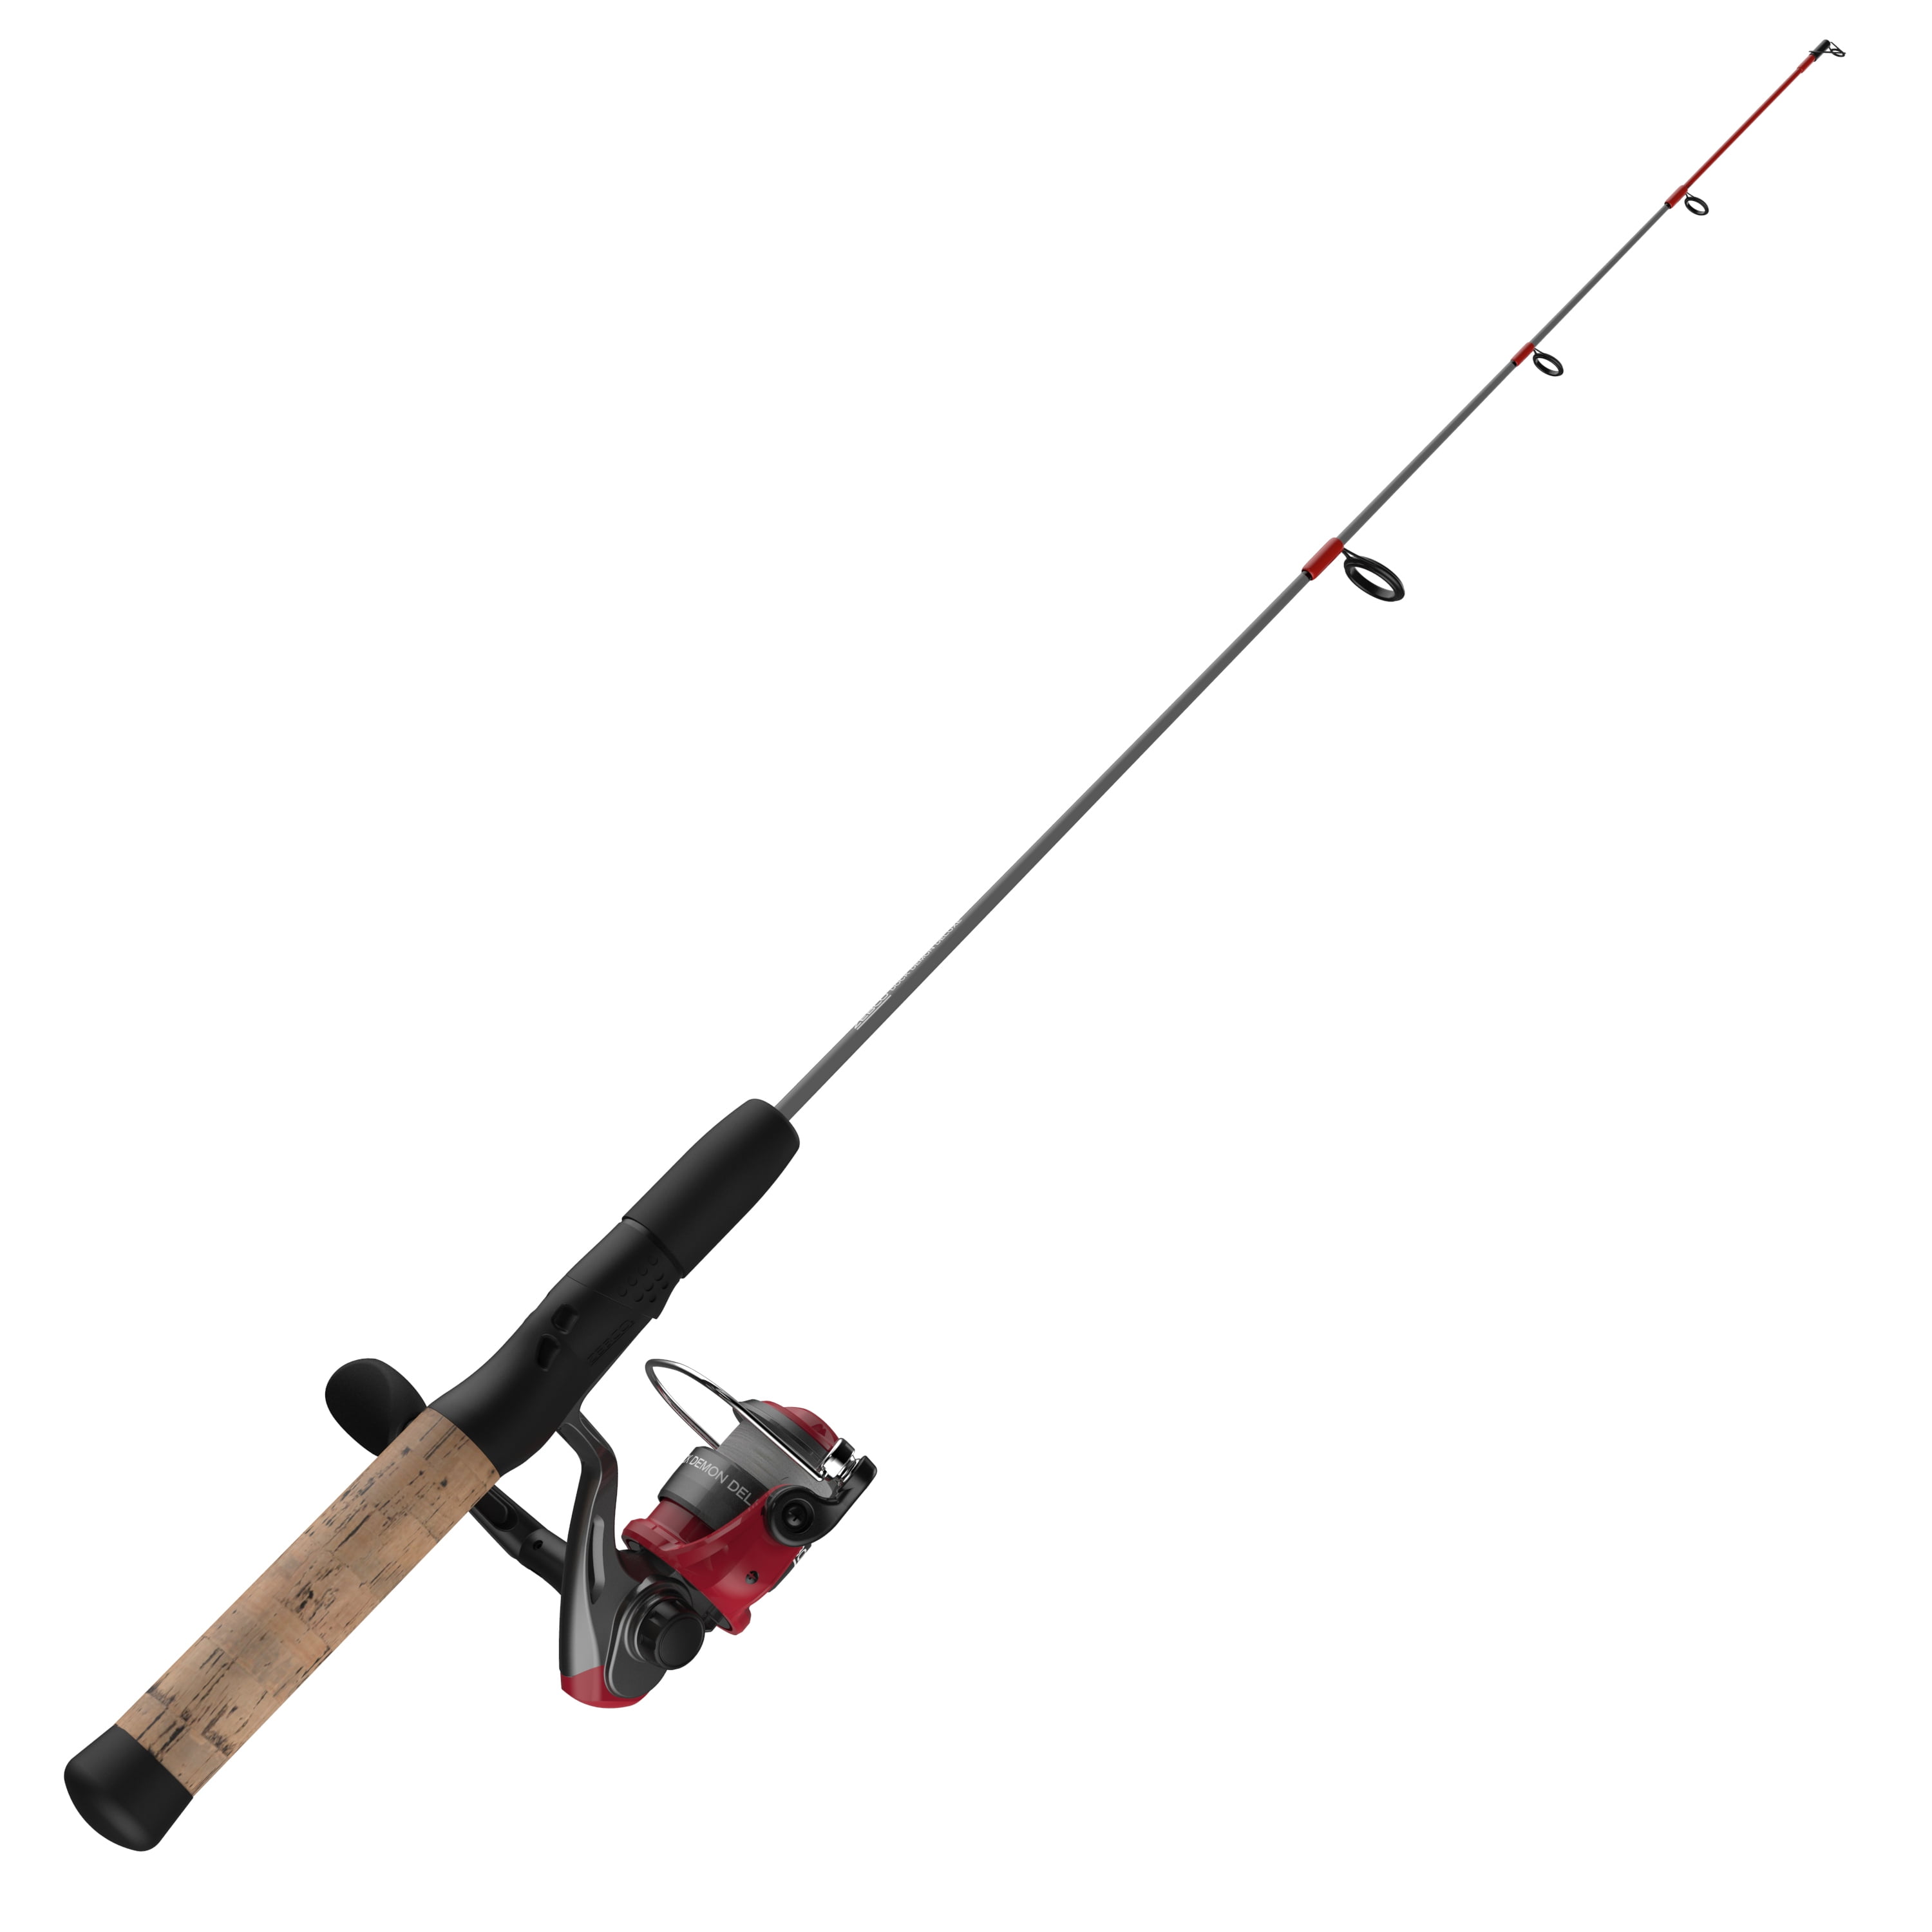 Zebco Dock Demon Deluxe Spinning Reel and Fishing Rod Combo